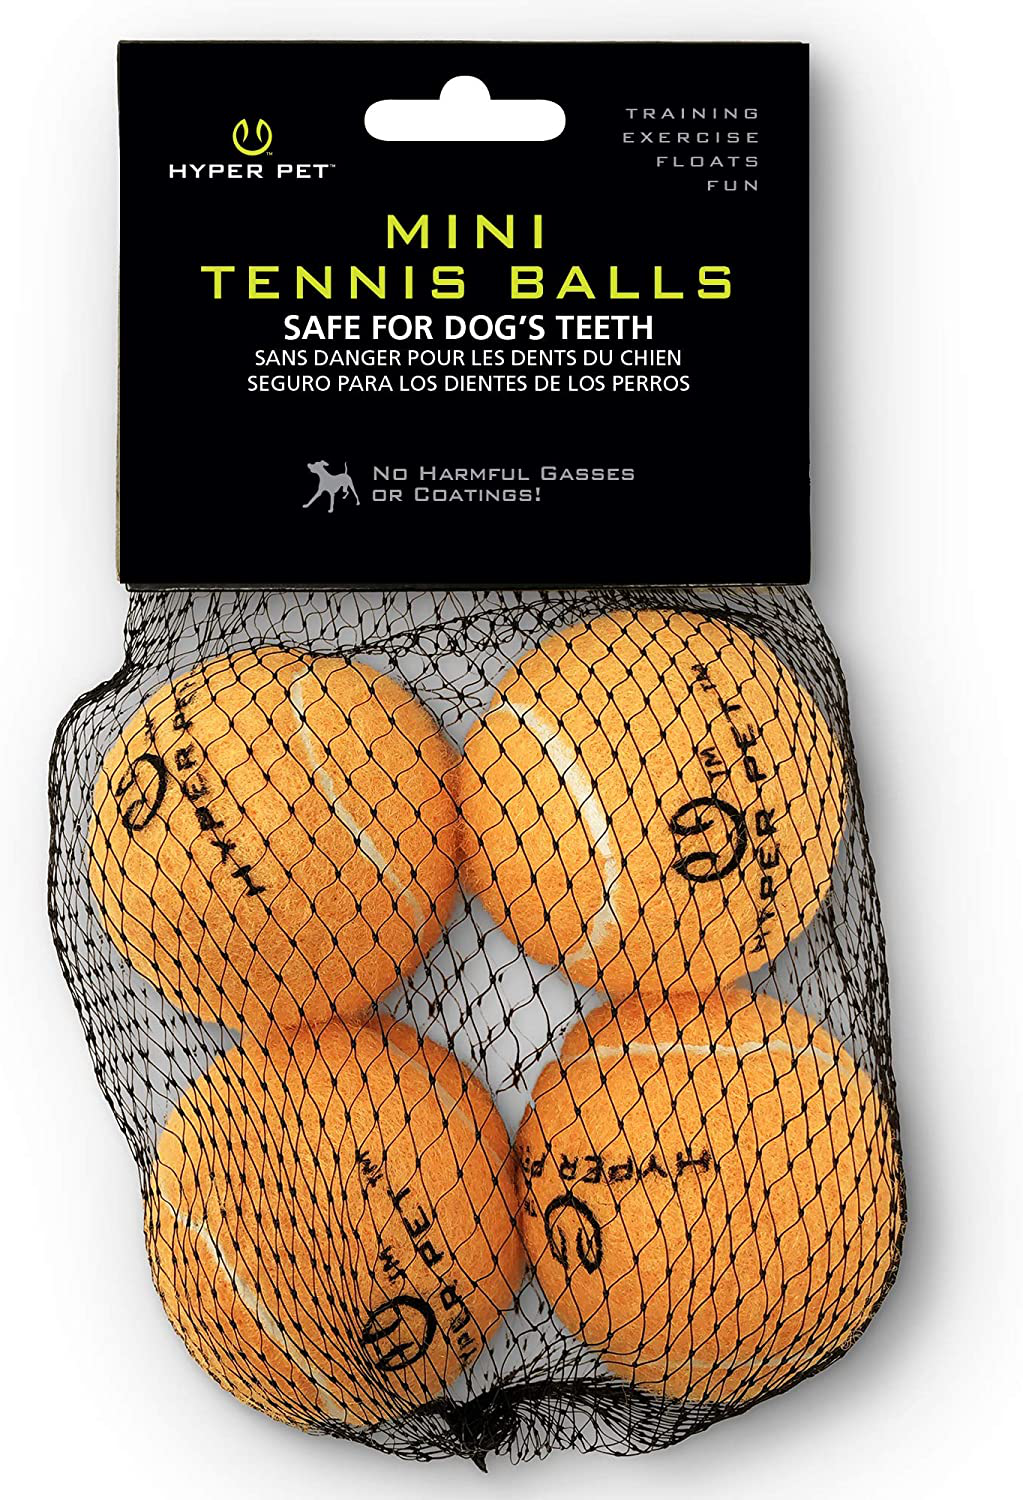 Hyper Pet Tennis Balls for Dogs (Dog Ball Dog Toys for Exercise, Hyper Pet K9 Kannon K2 & Hyper Pet Ball Launcher) Interactive Dog Toys for Large Dogs, Medium Dogs & Small Dogs - 2 Size Options